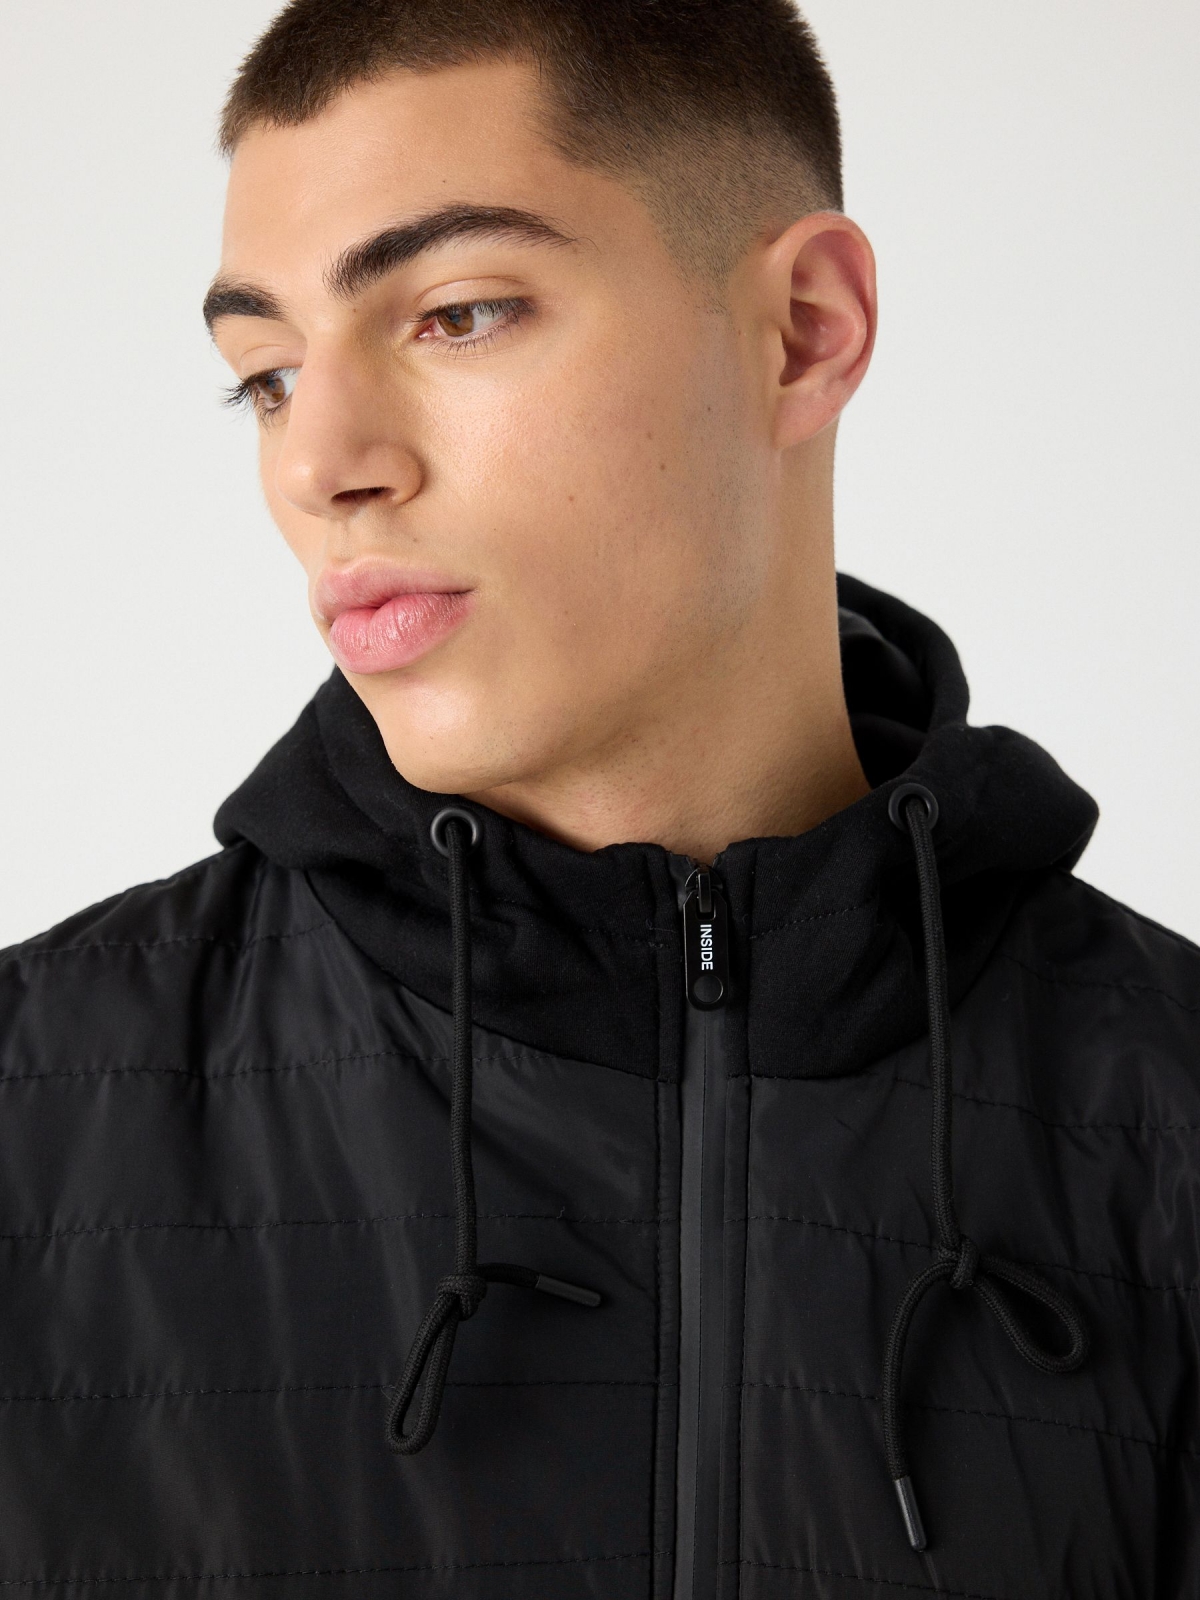 Combined hooded jacket black detail view